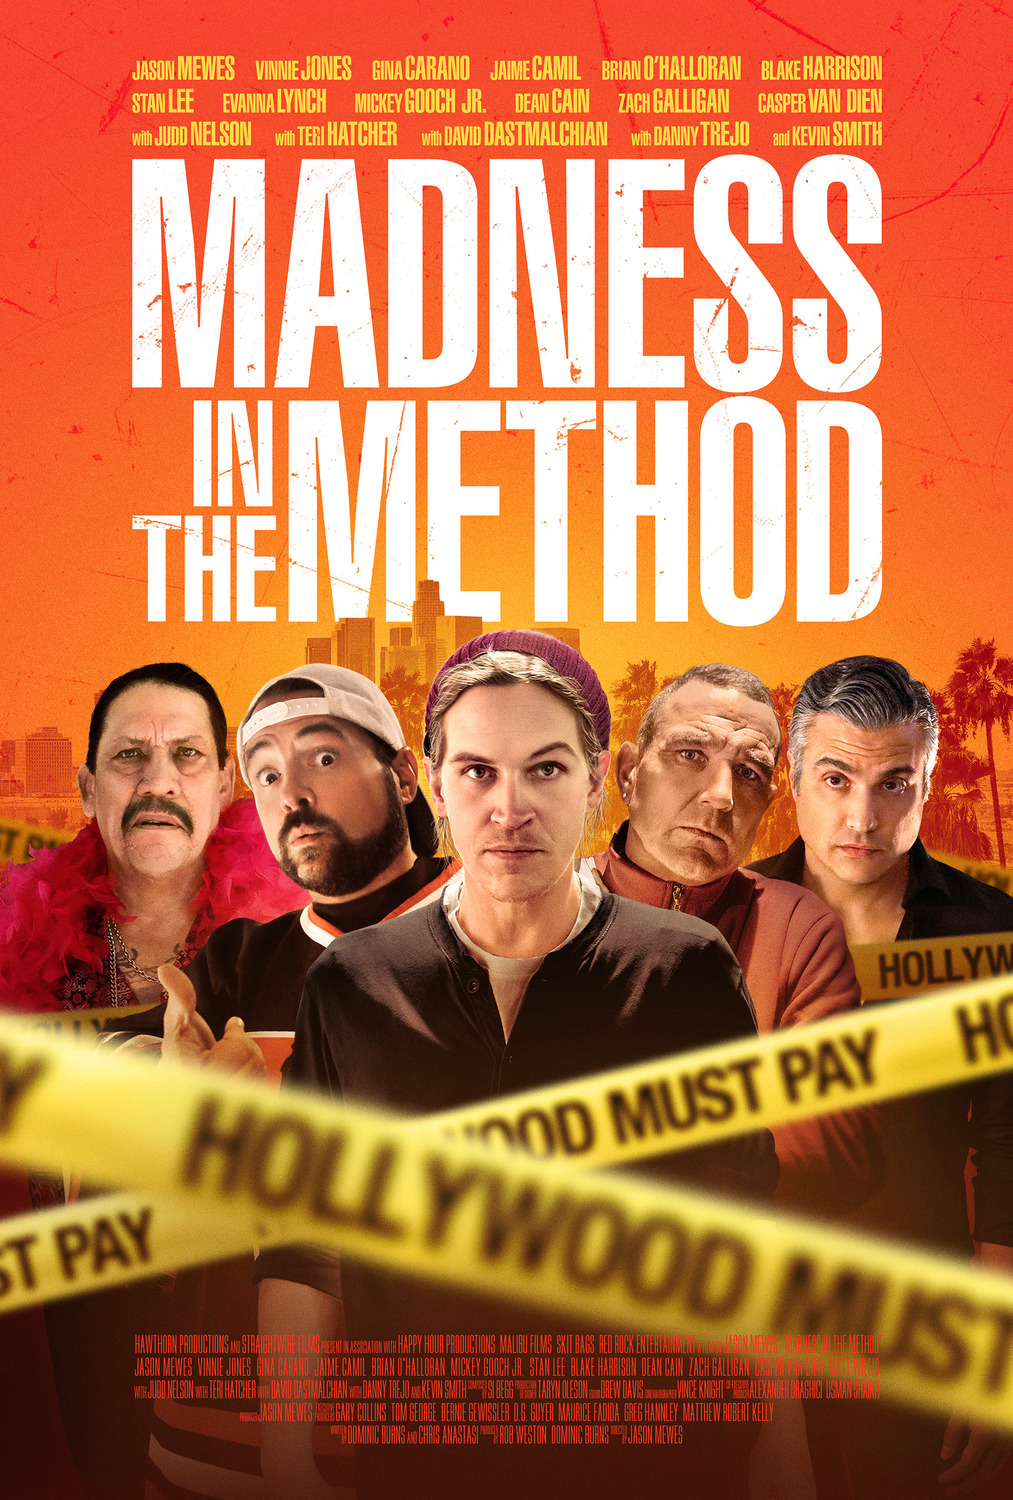 Extra Large Movie Poster Image for Madness in the Method 